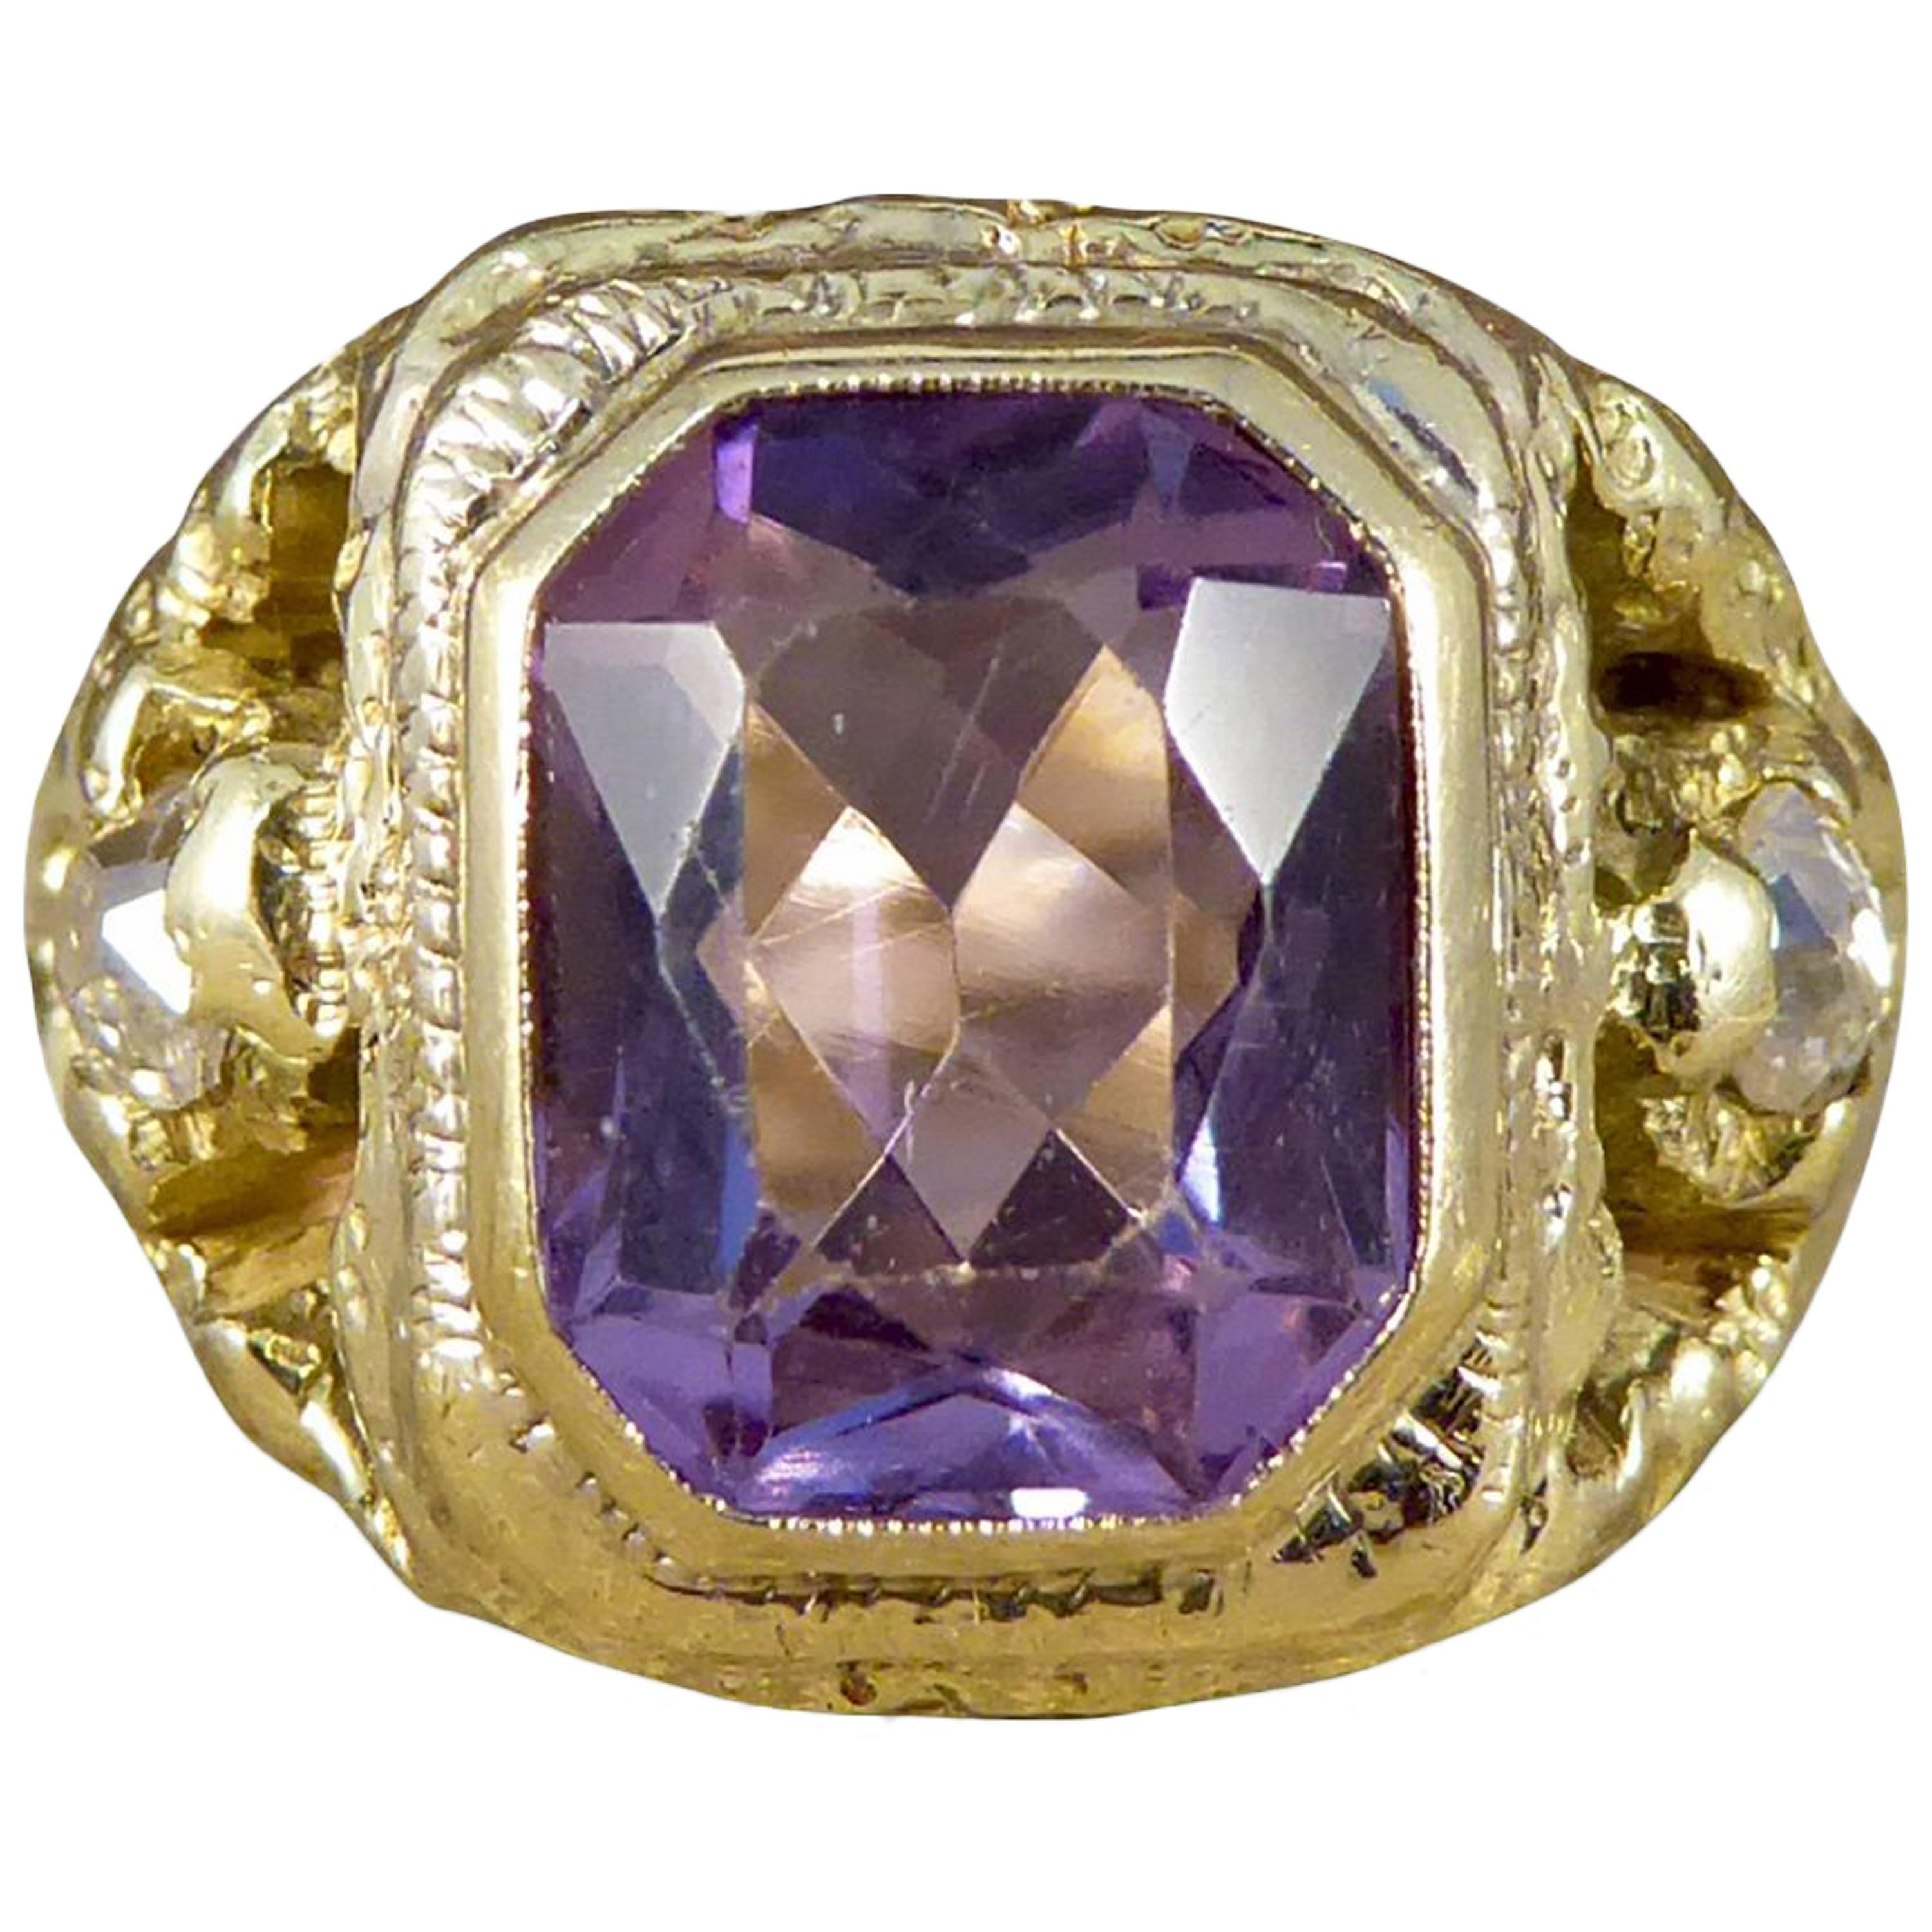 Antique Early Victorian Amethyst and Old Cut Diamond Ring in 14 Carat Gold